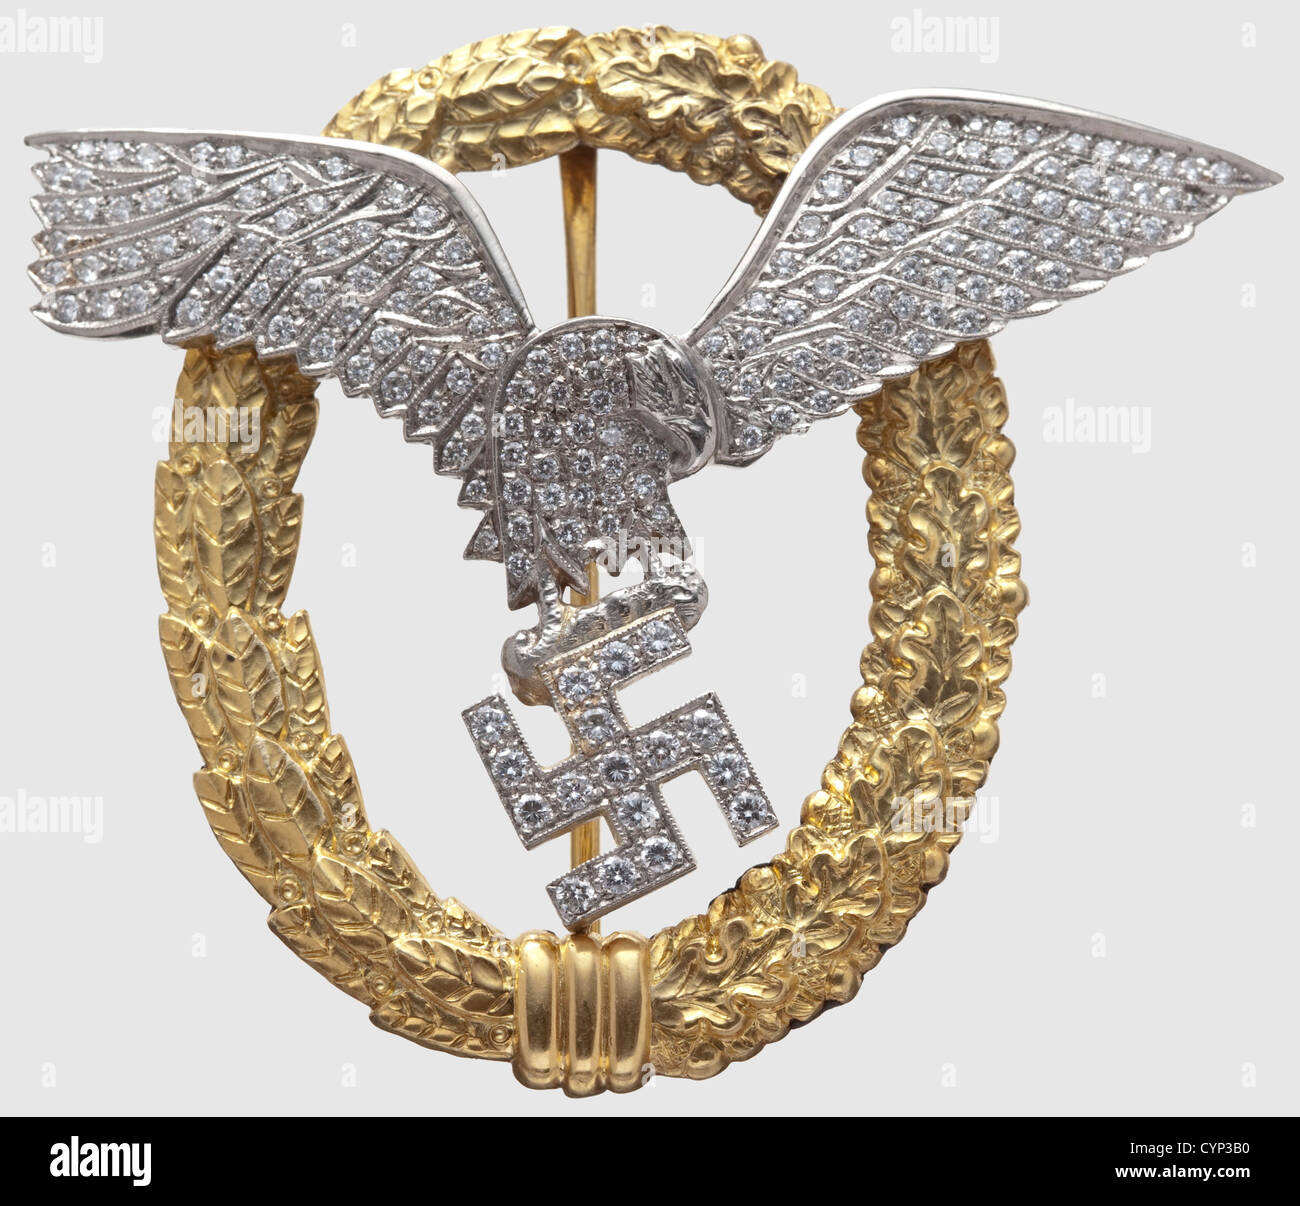 Admiral Miklós Horthy von Nagybánya(1868 - 1957)- a Combined Pilots and Observers Badge in Gold with Diamonds,The oak leaf and laurel wreath in gold,marked '585',the domed eagle and the swastika of platinum,adorned with more than 160 diamonds set à jour(one missing),assembled with two slit nuts on soldered threaded pins,the perimeter of the eagle reinforced on the reverse side by a gold-plated frame.The swastika pinned to the wreath binding at the bottom of the wreath.The attachment needle fitted with a roller hinge and a safety catch.Weight 45.67 g,Additional-Rights-Clearences-Not Available Stock Photo